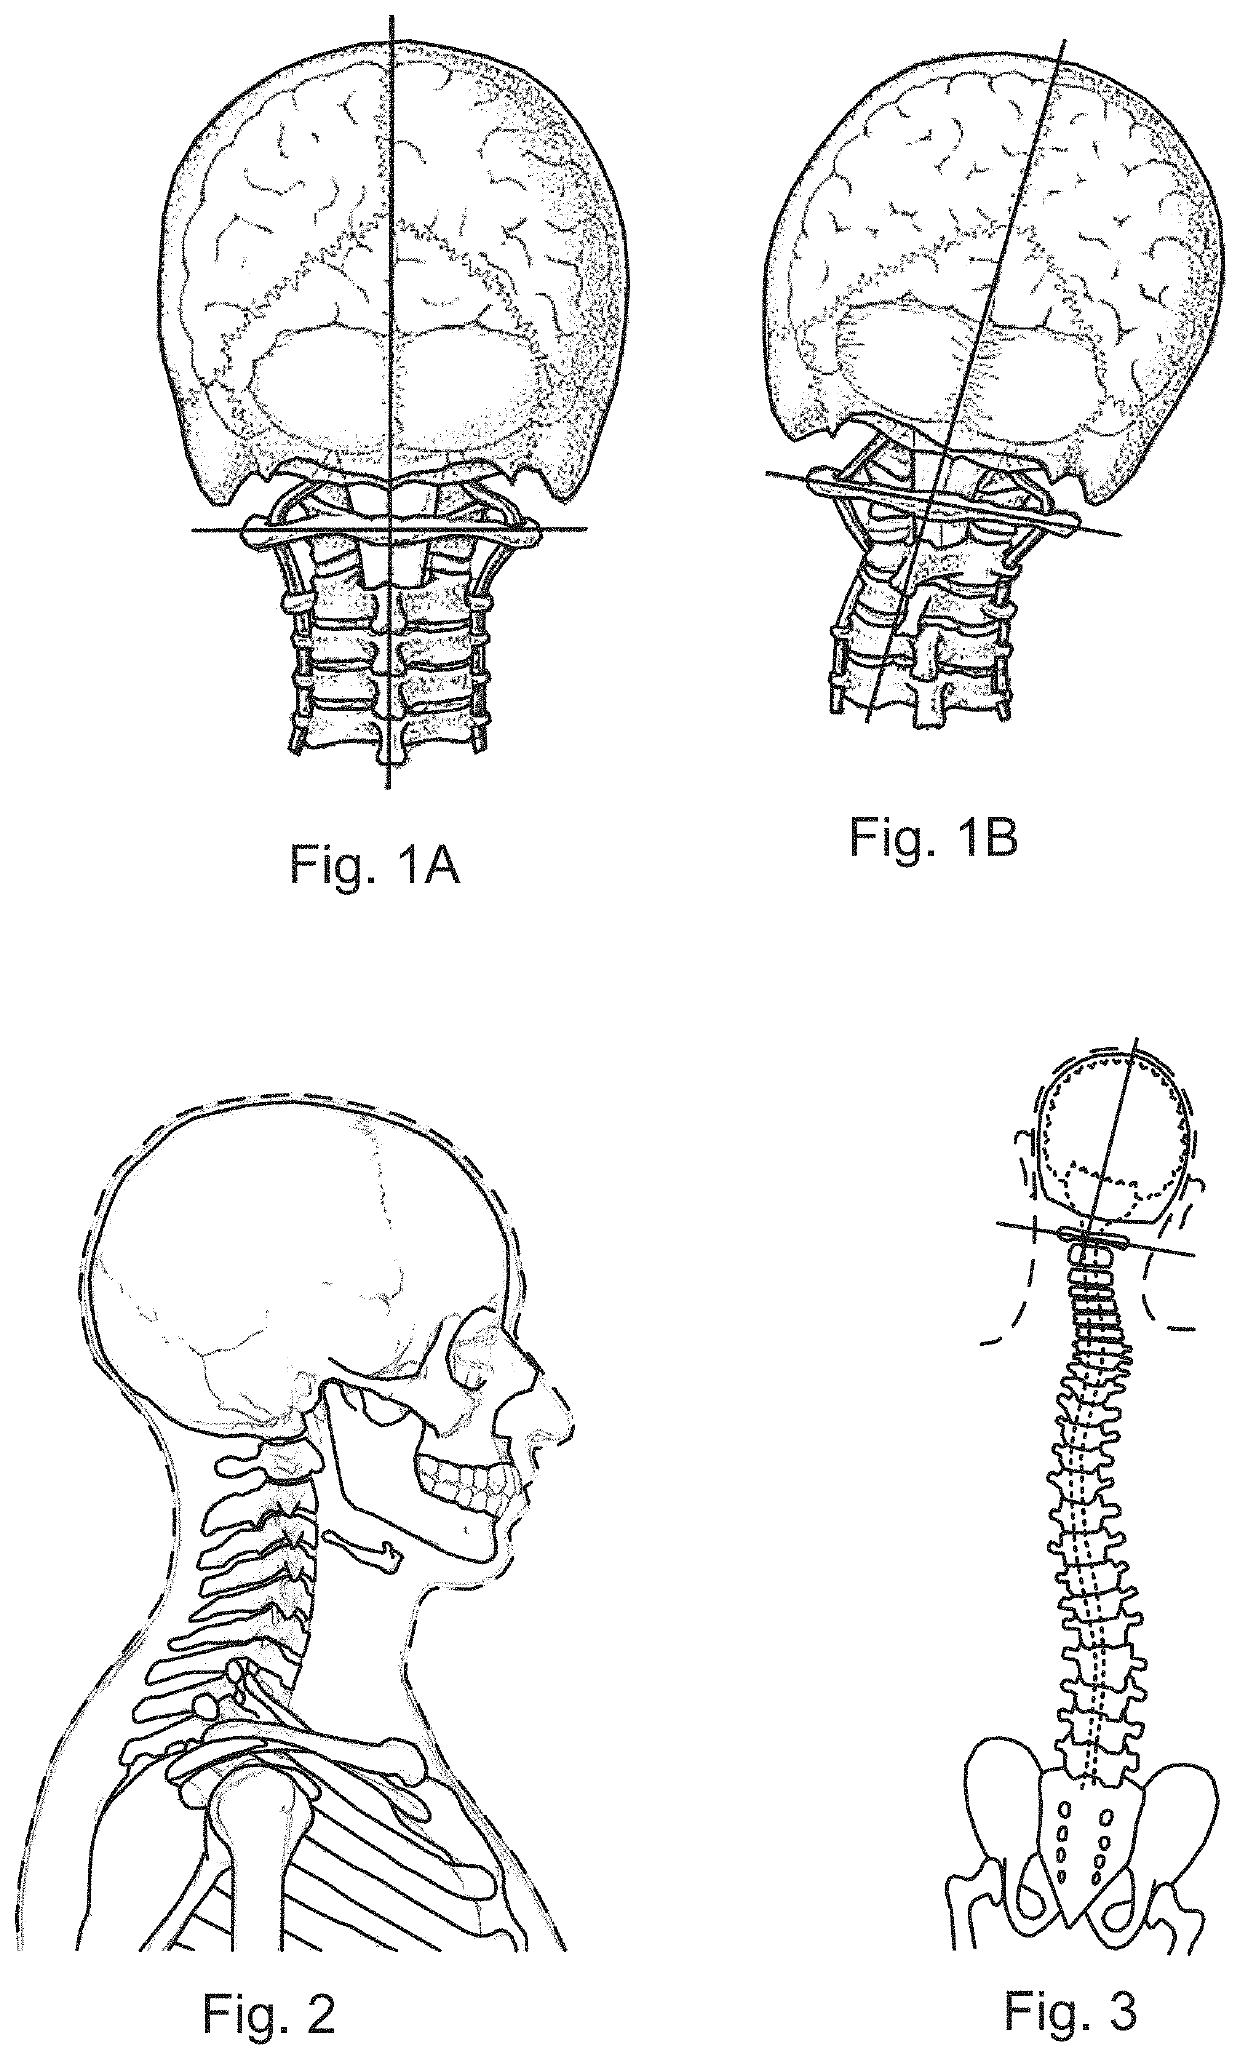 User-customizable orthopedic alignment device with alignment gap